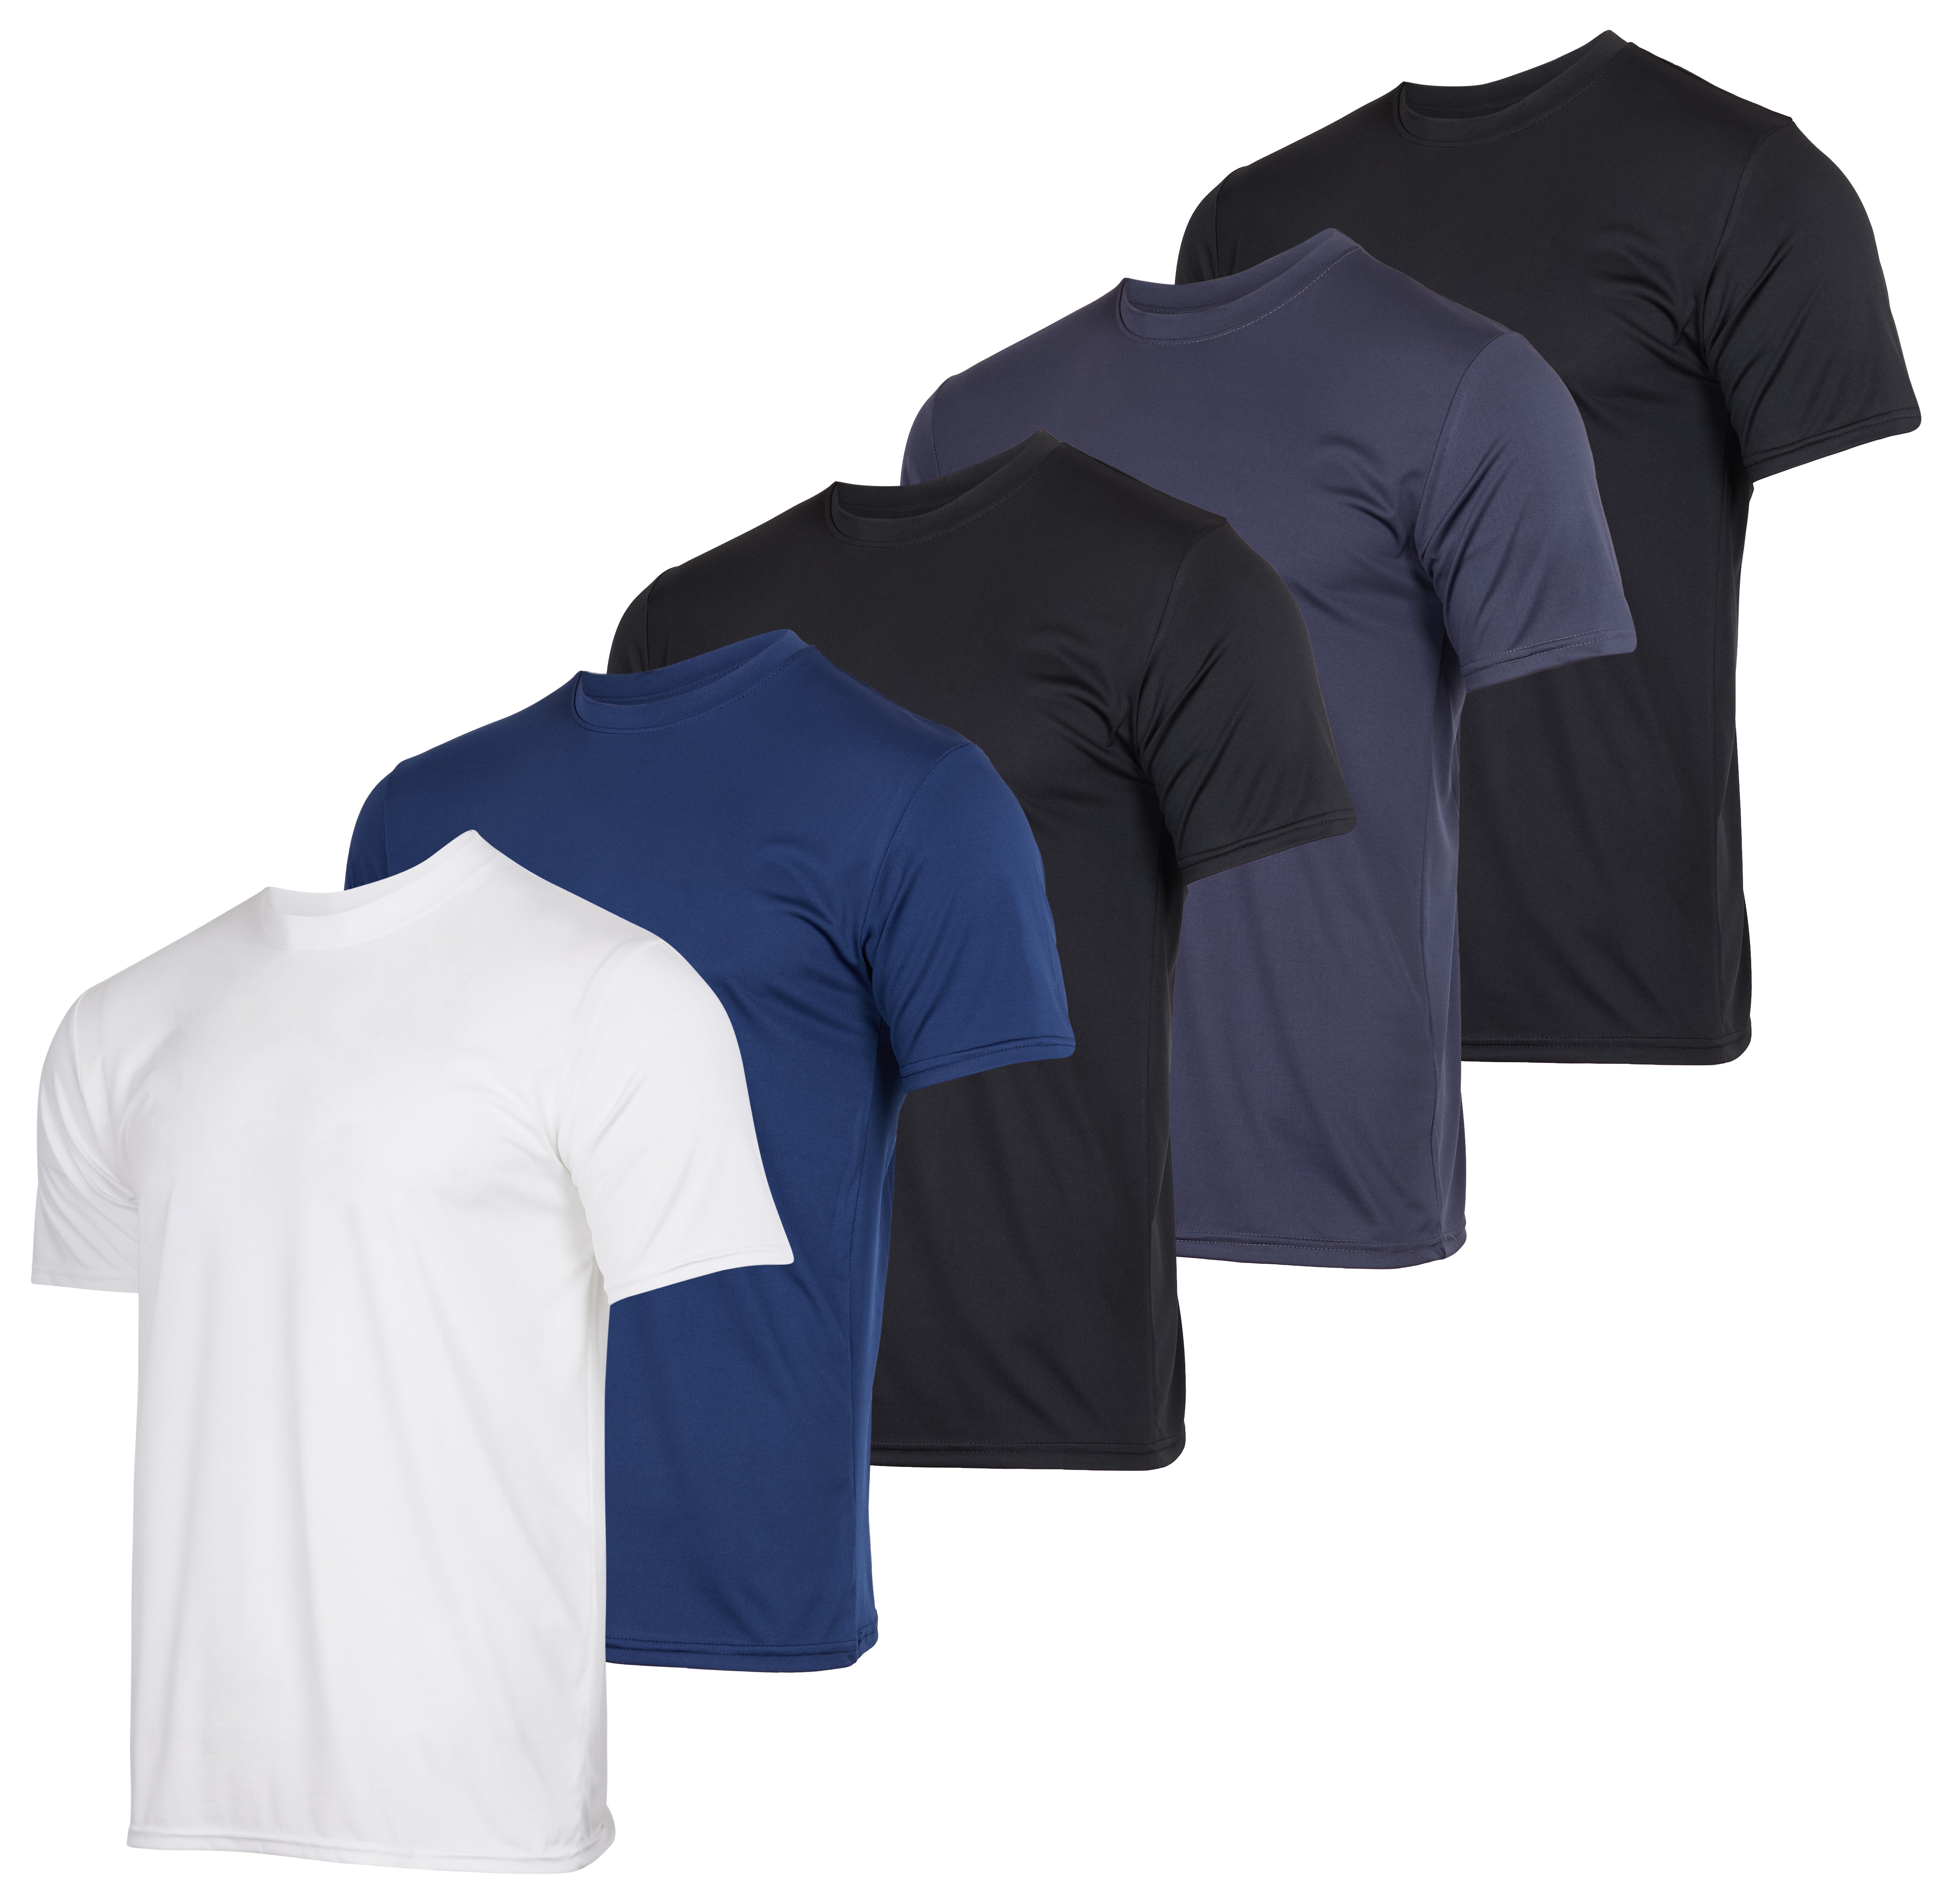 Real Essentials 5 Pack: Men's Dry-Fit Moisture Wicking Active